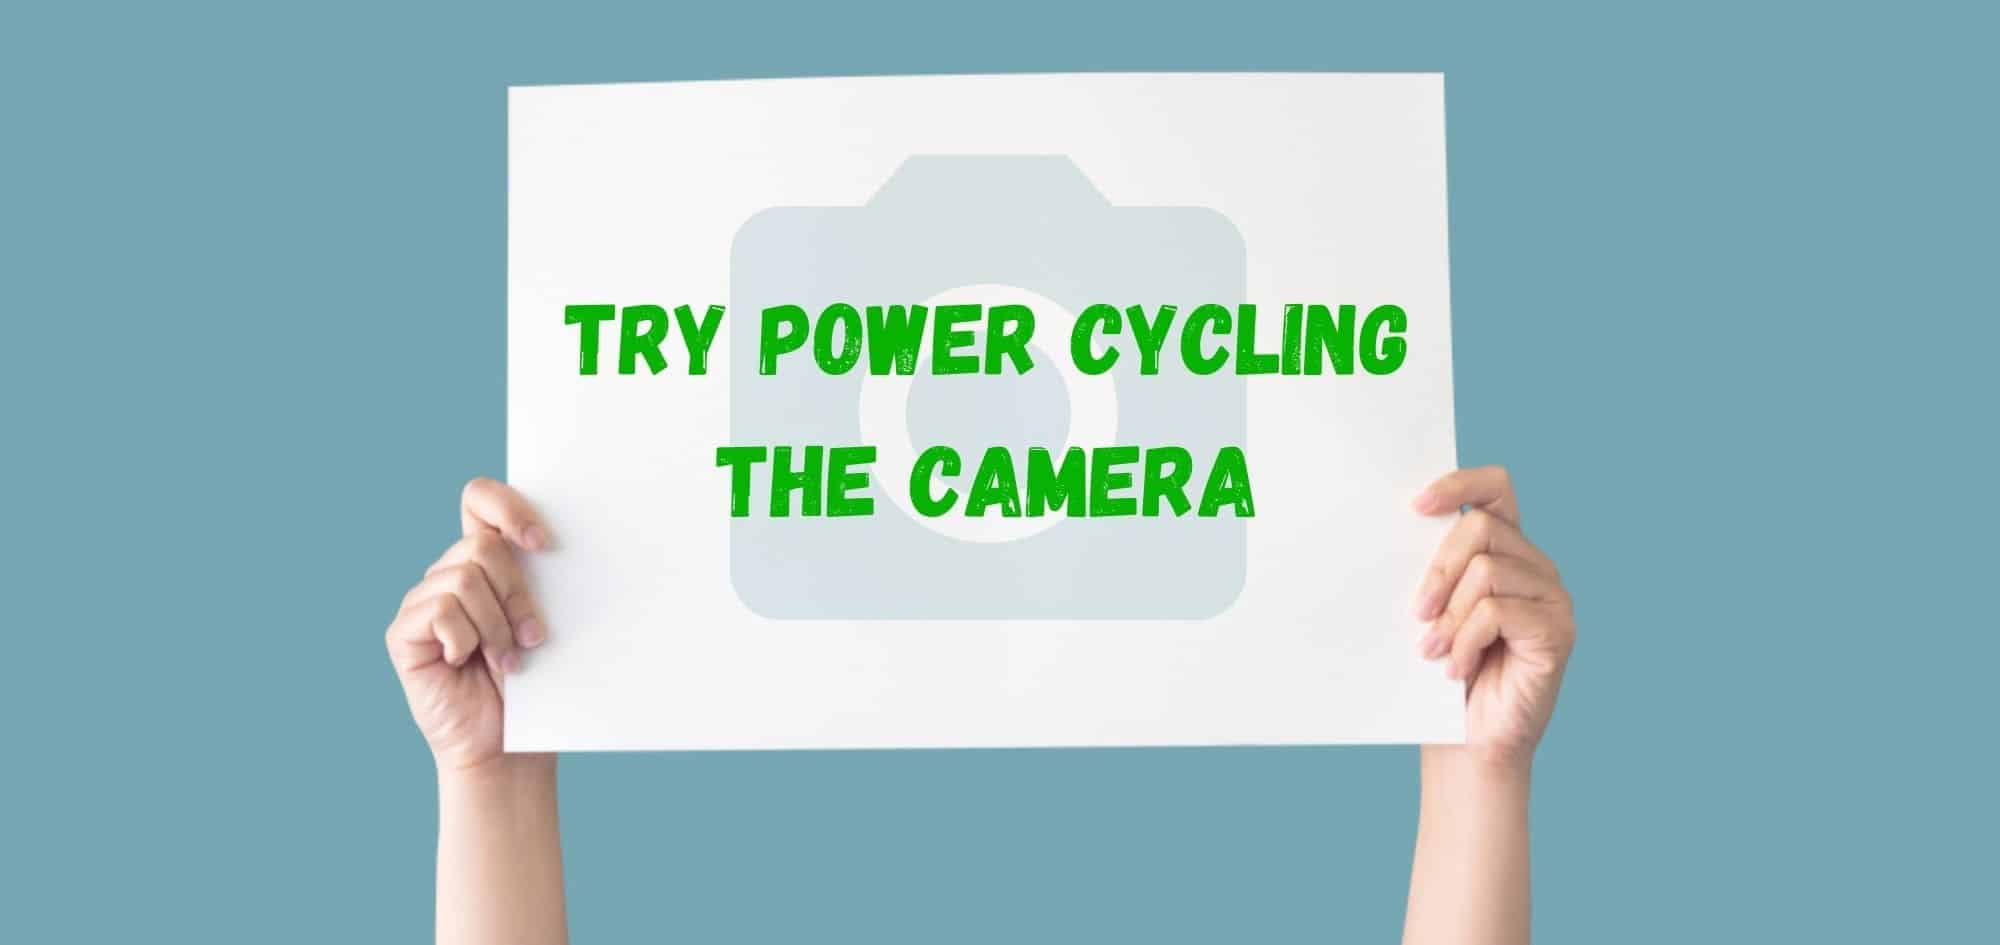 Try power cycling the camera